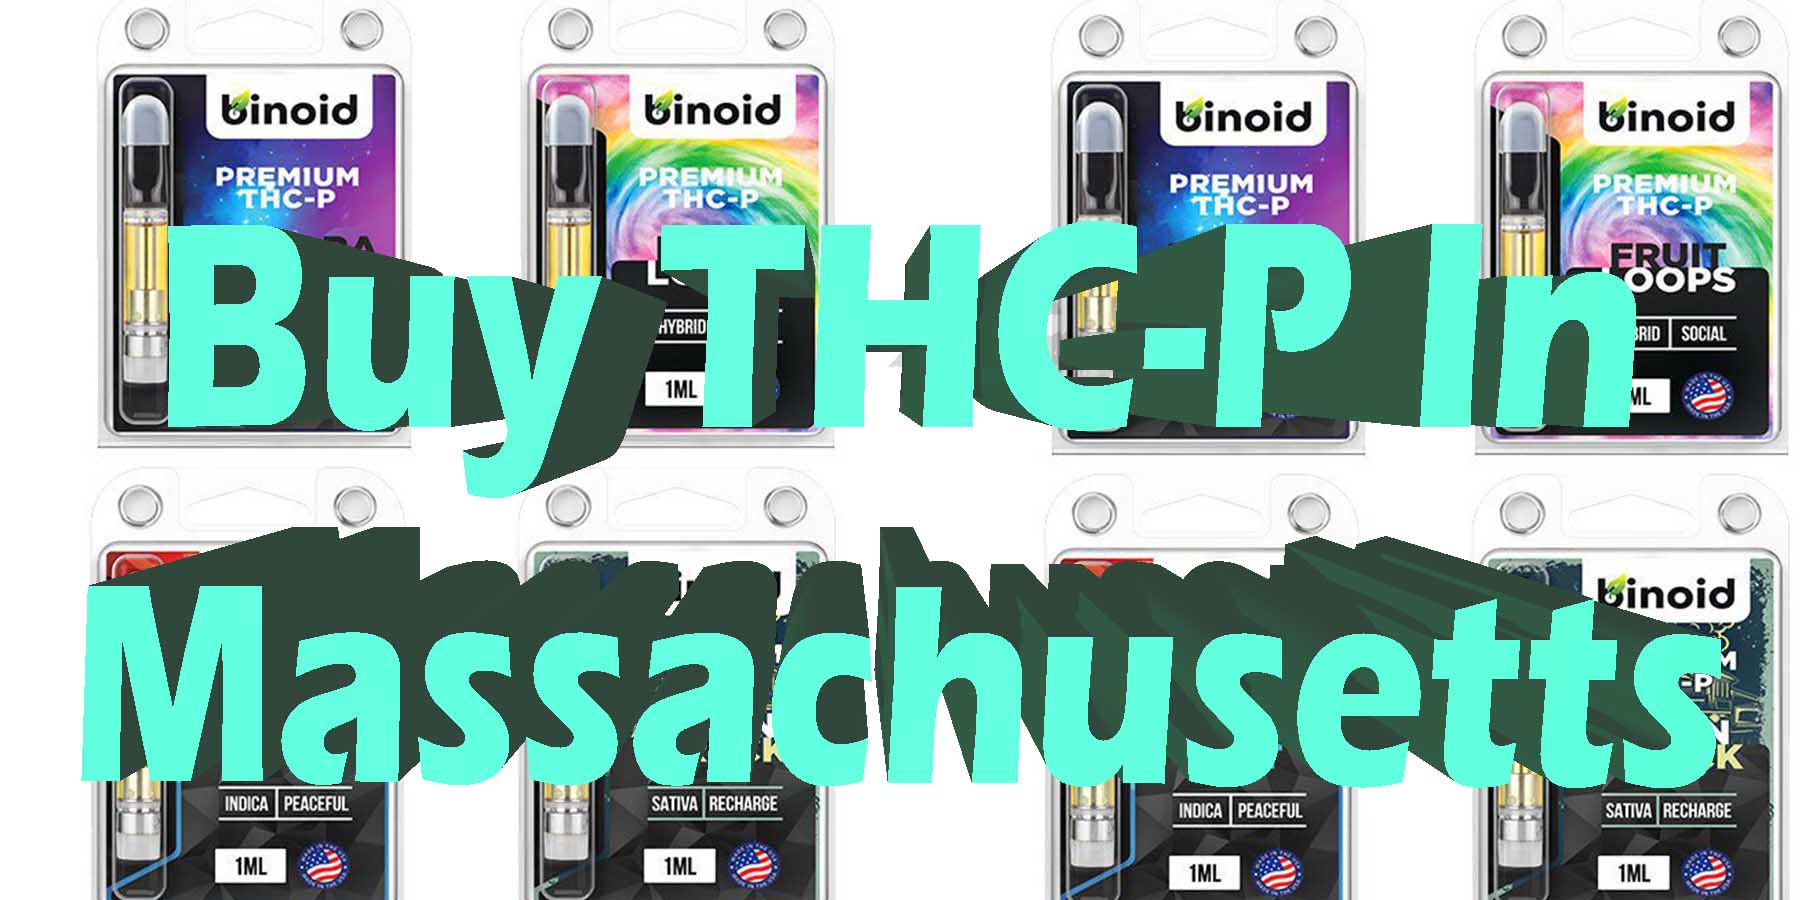 Buy THC-P In Massachusetts THC-P Products HowToGetNearMe BestPlace LowestPrice Coupon Discount For Smoking Best Brand D9 D8 THCA Indoor Good Binoid.